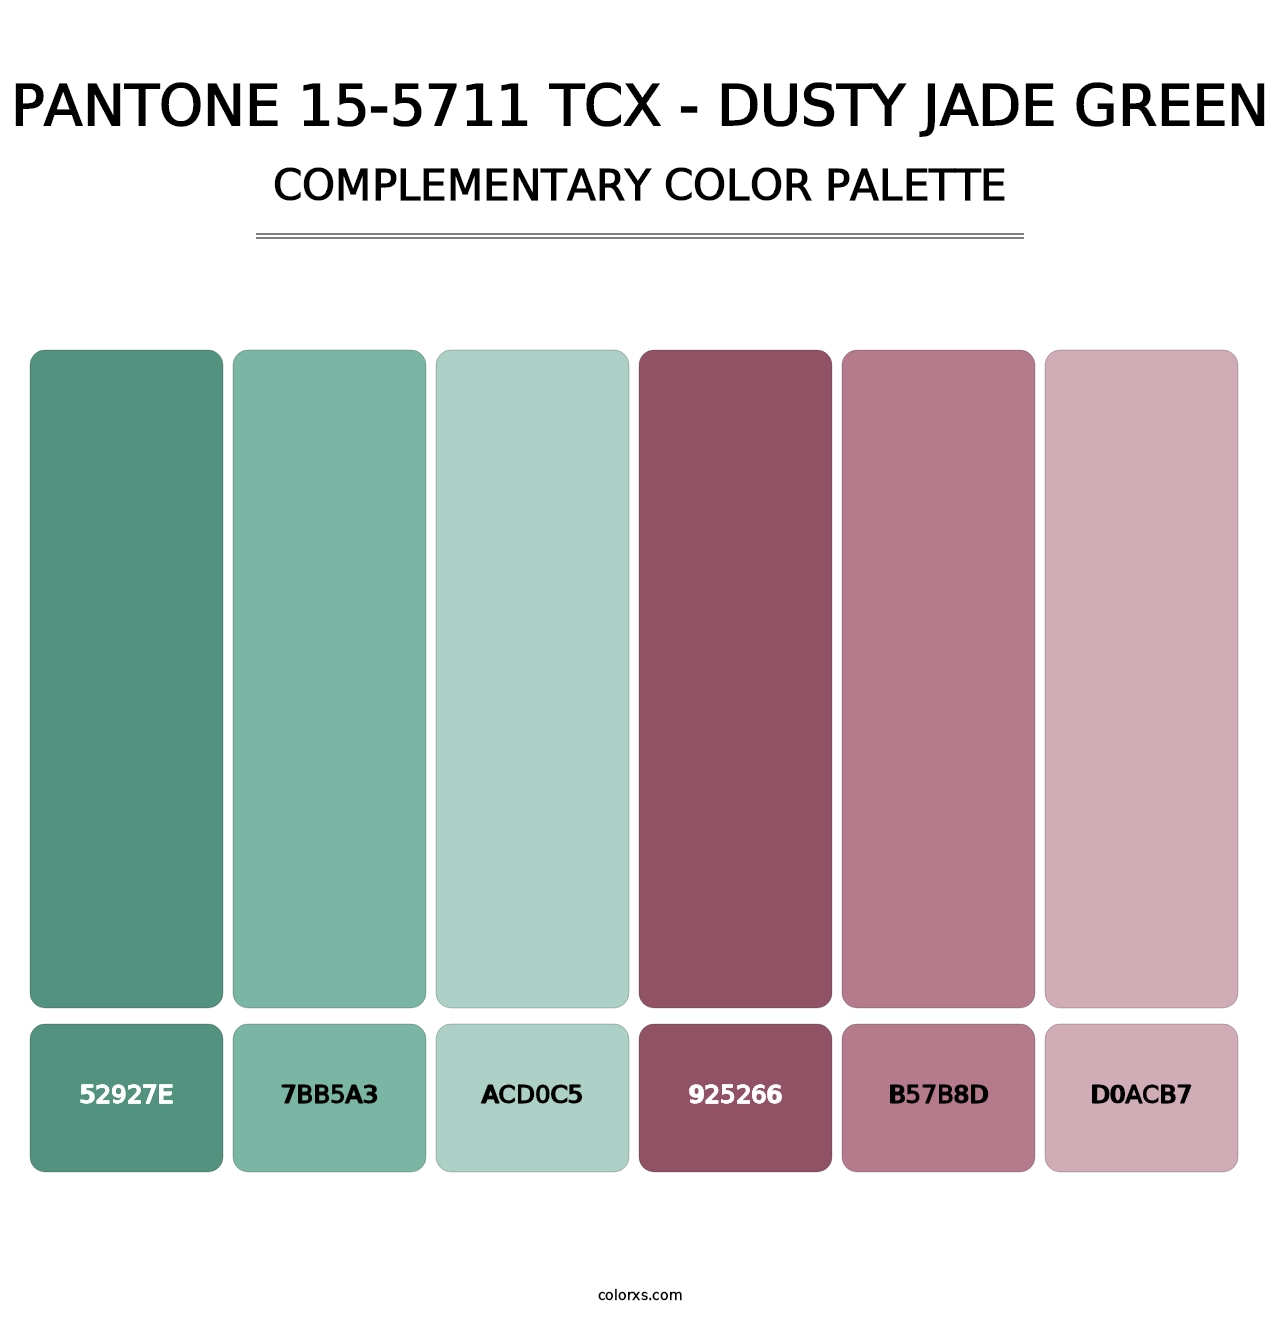 PANTONE 15-5711 TCX - Dusty Jade Green - Complementary Color Palette